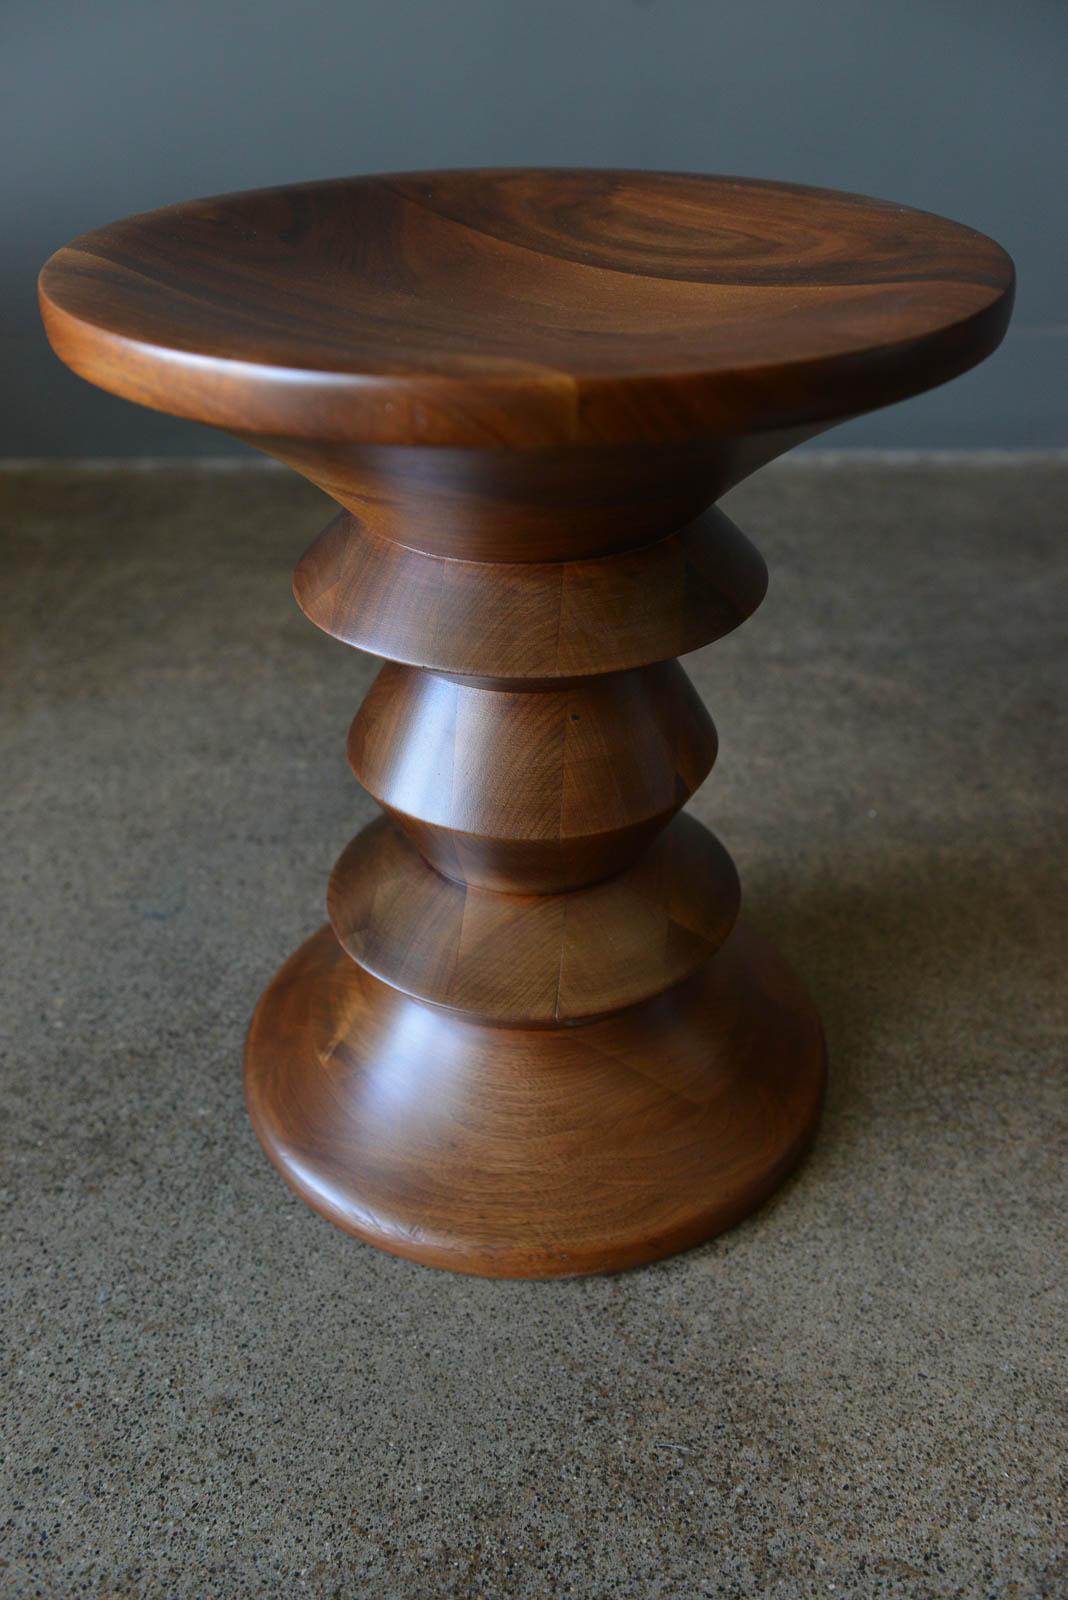 American Walnut Time Life Stool, Model C, by Charles Eames, ca. 1955